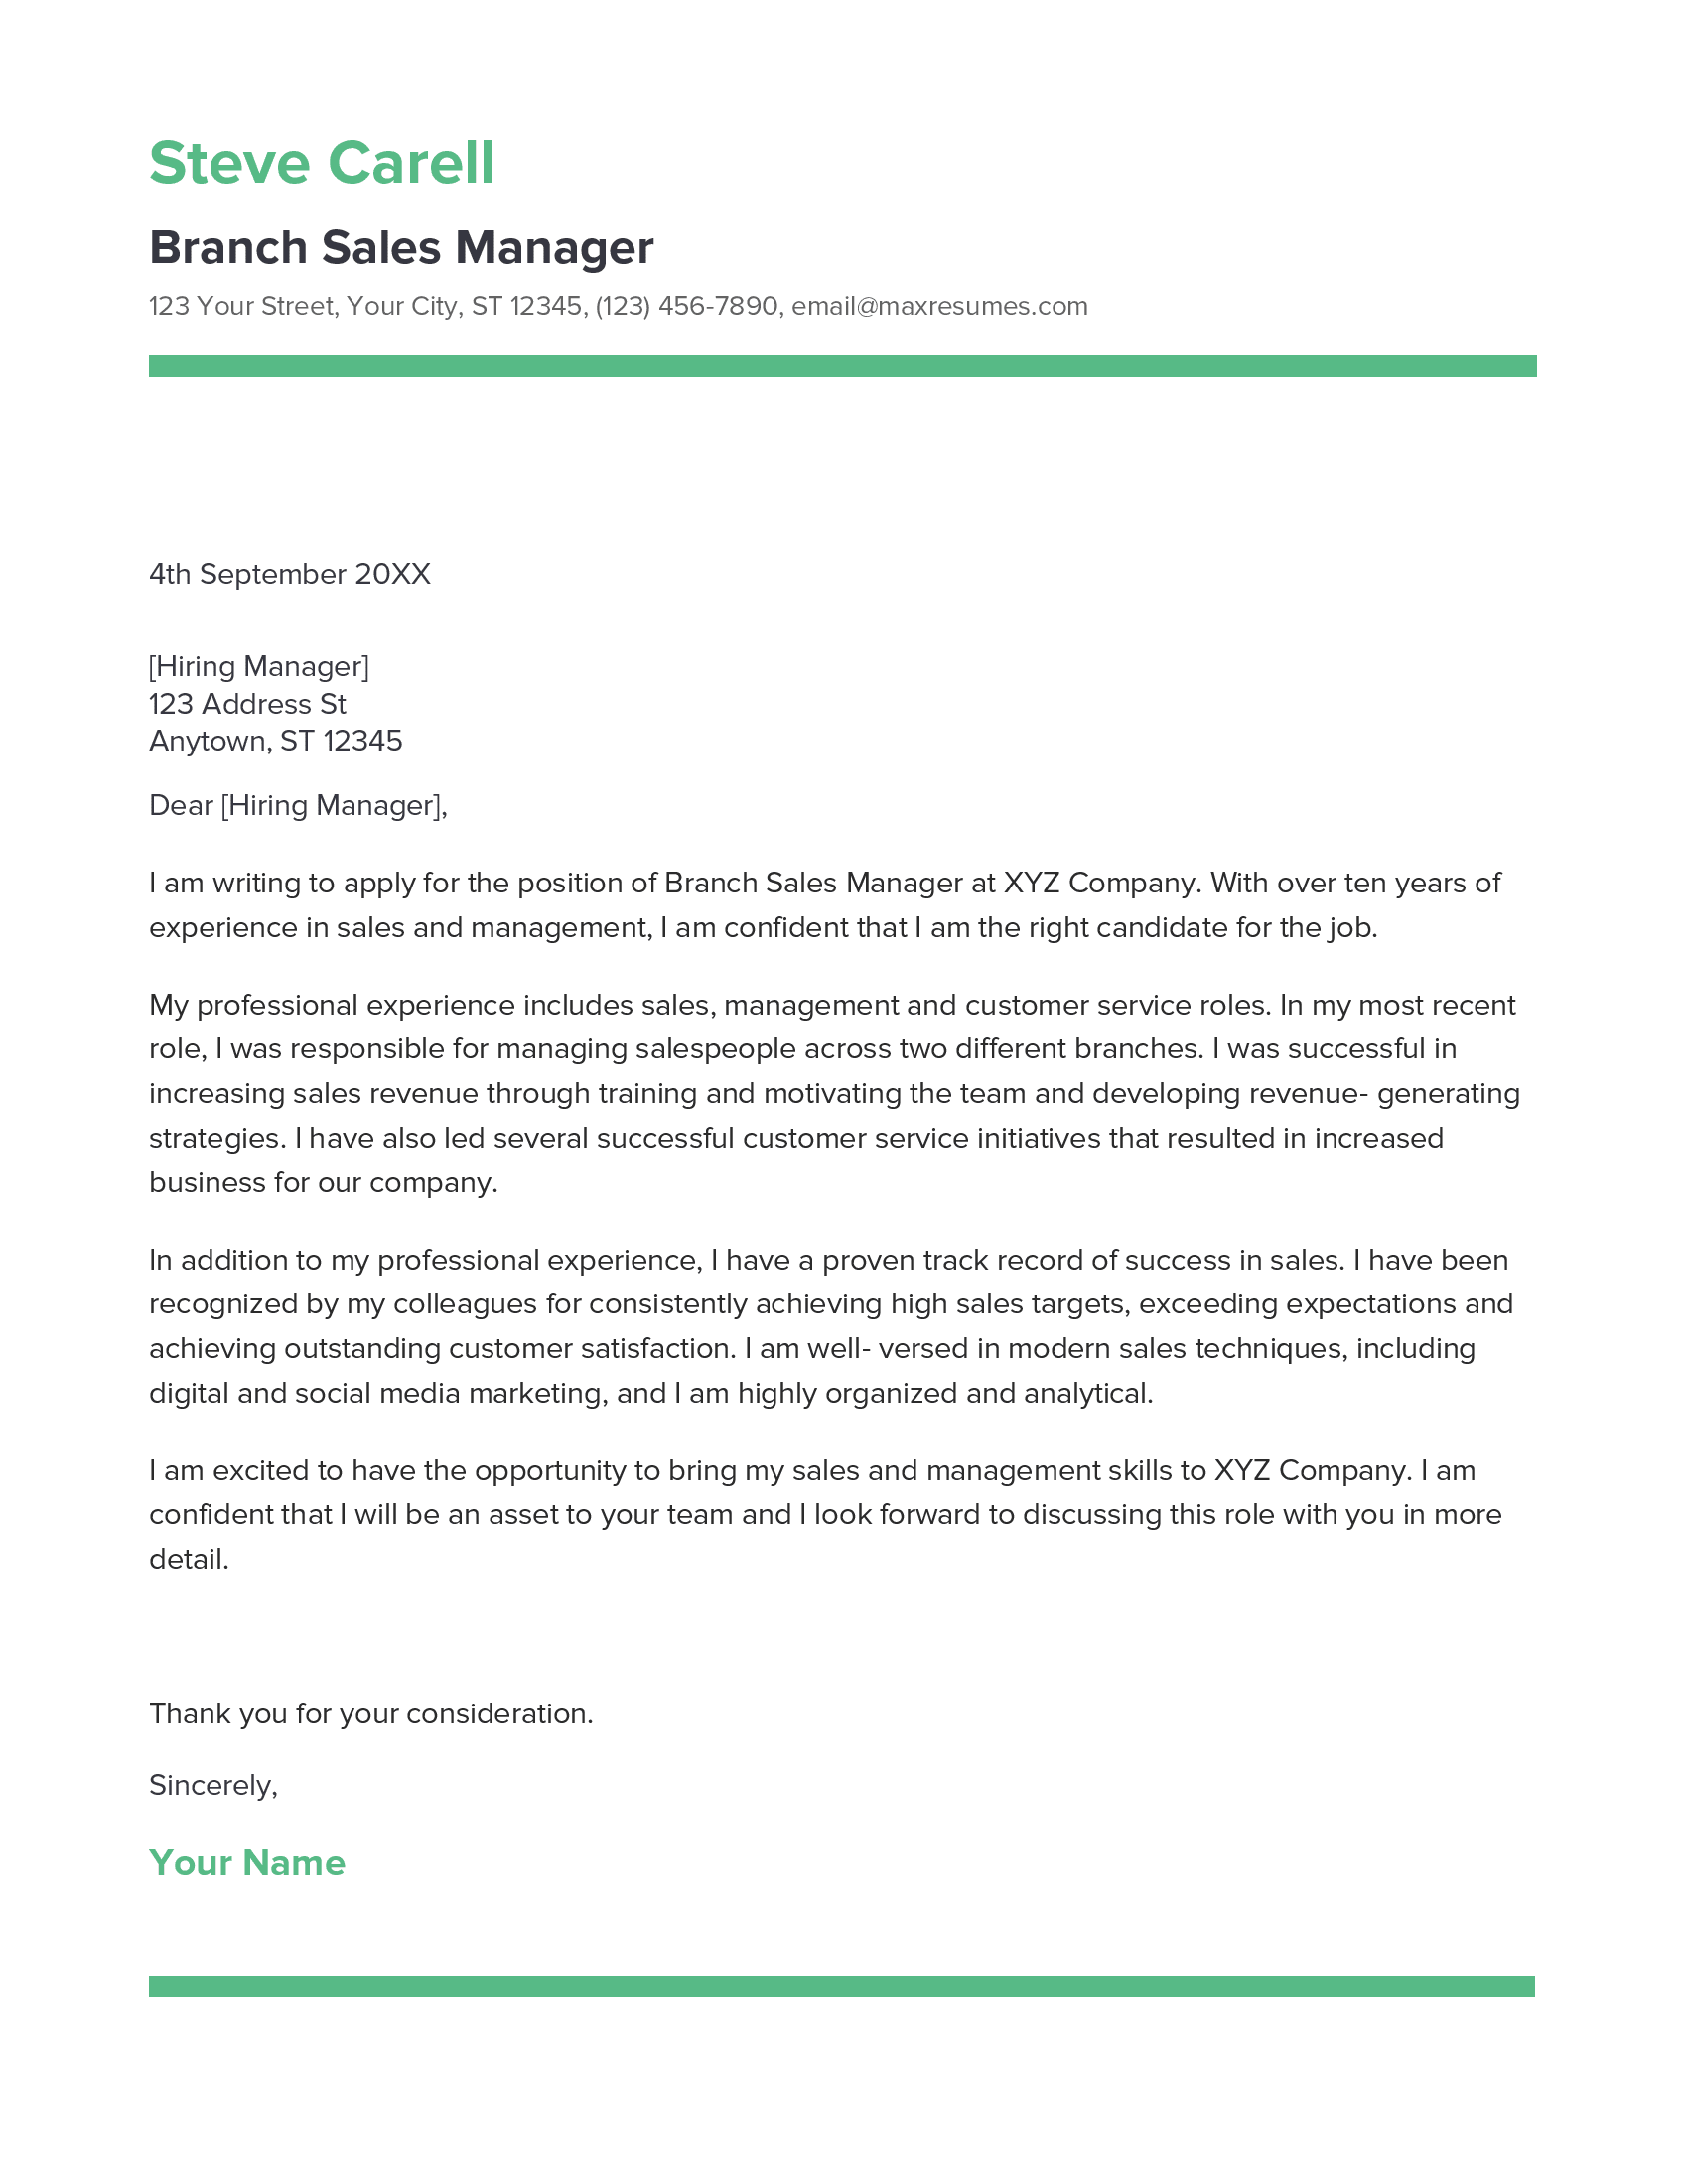 Branch Sales Manager Cover Letter Example